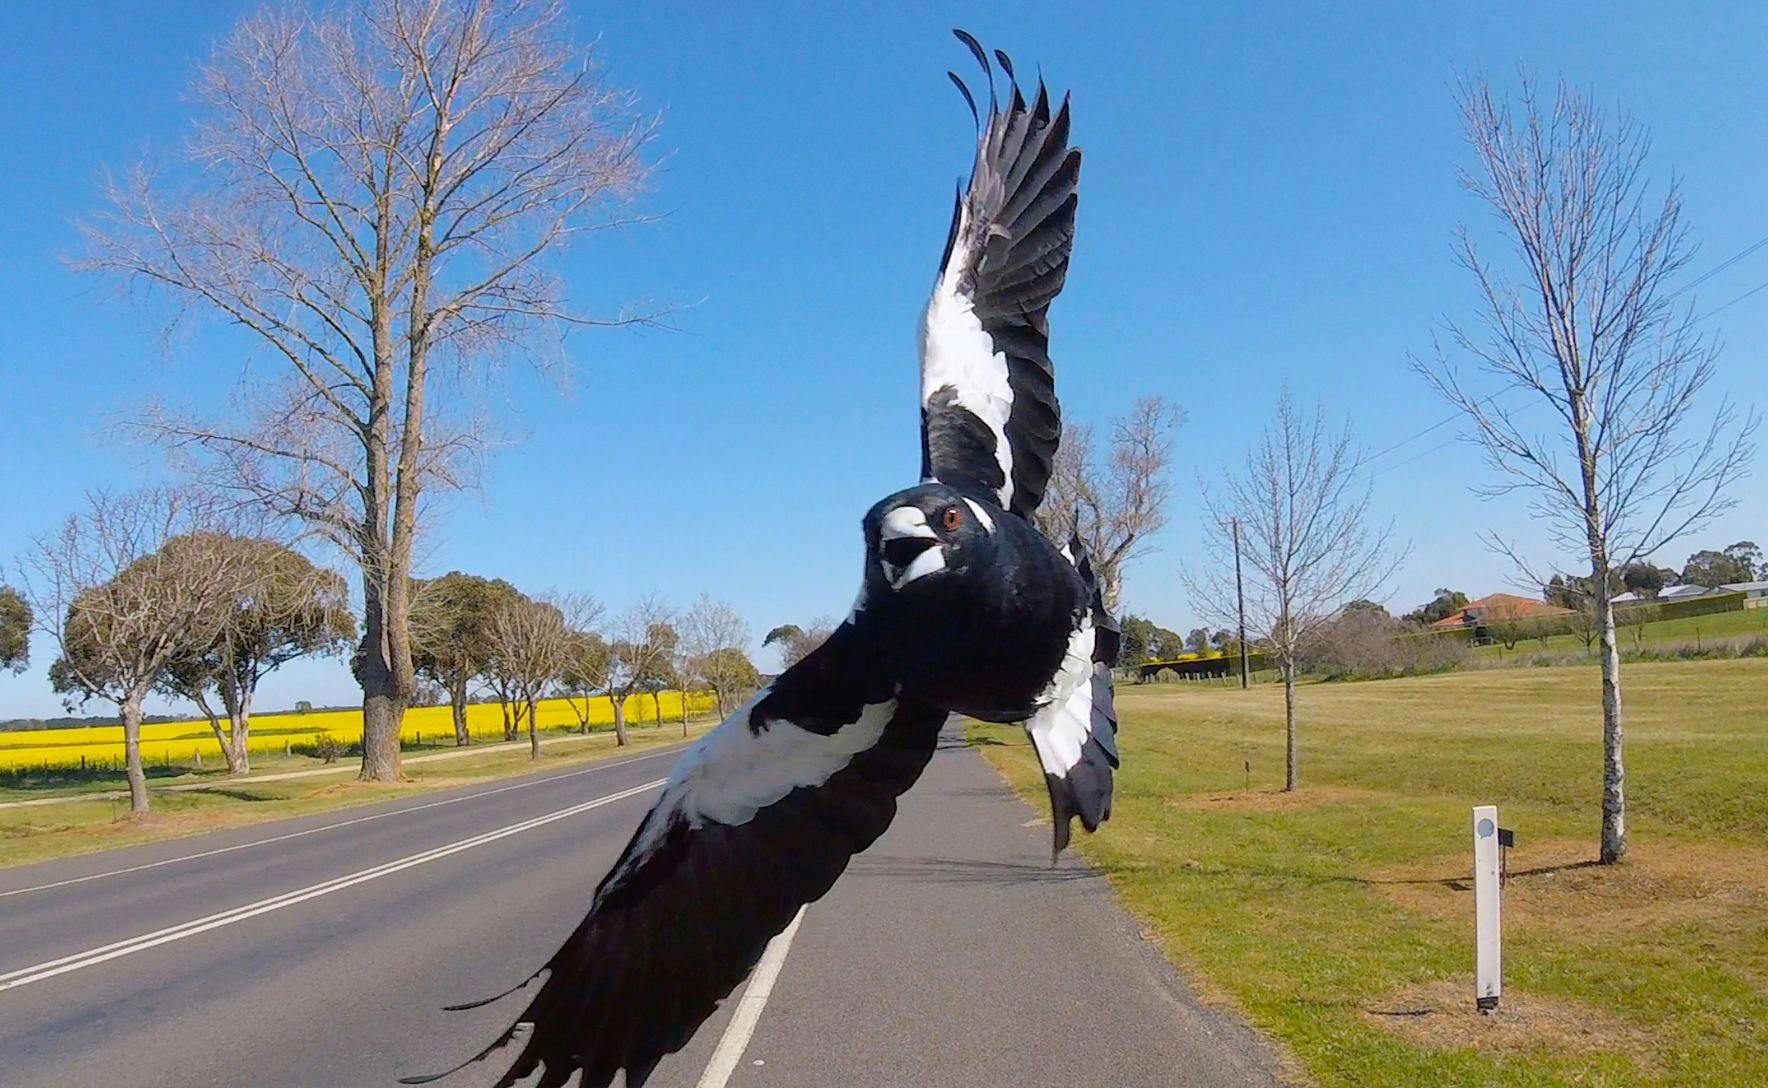 A magpie swoops towards the camera, wings spread and beak open. It is flying above an empty road on a blue sky day.